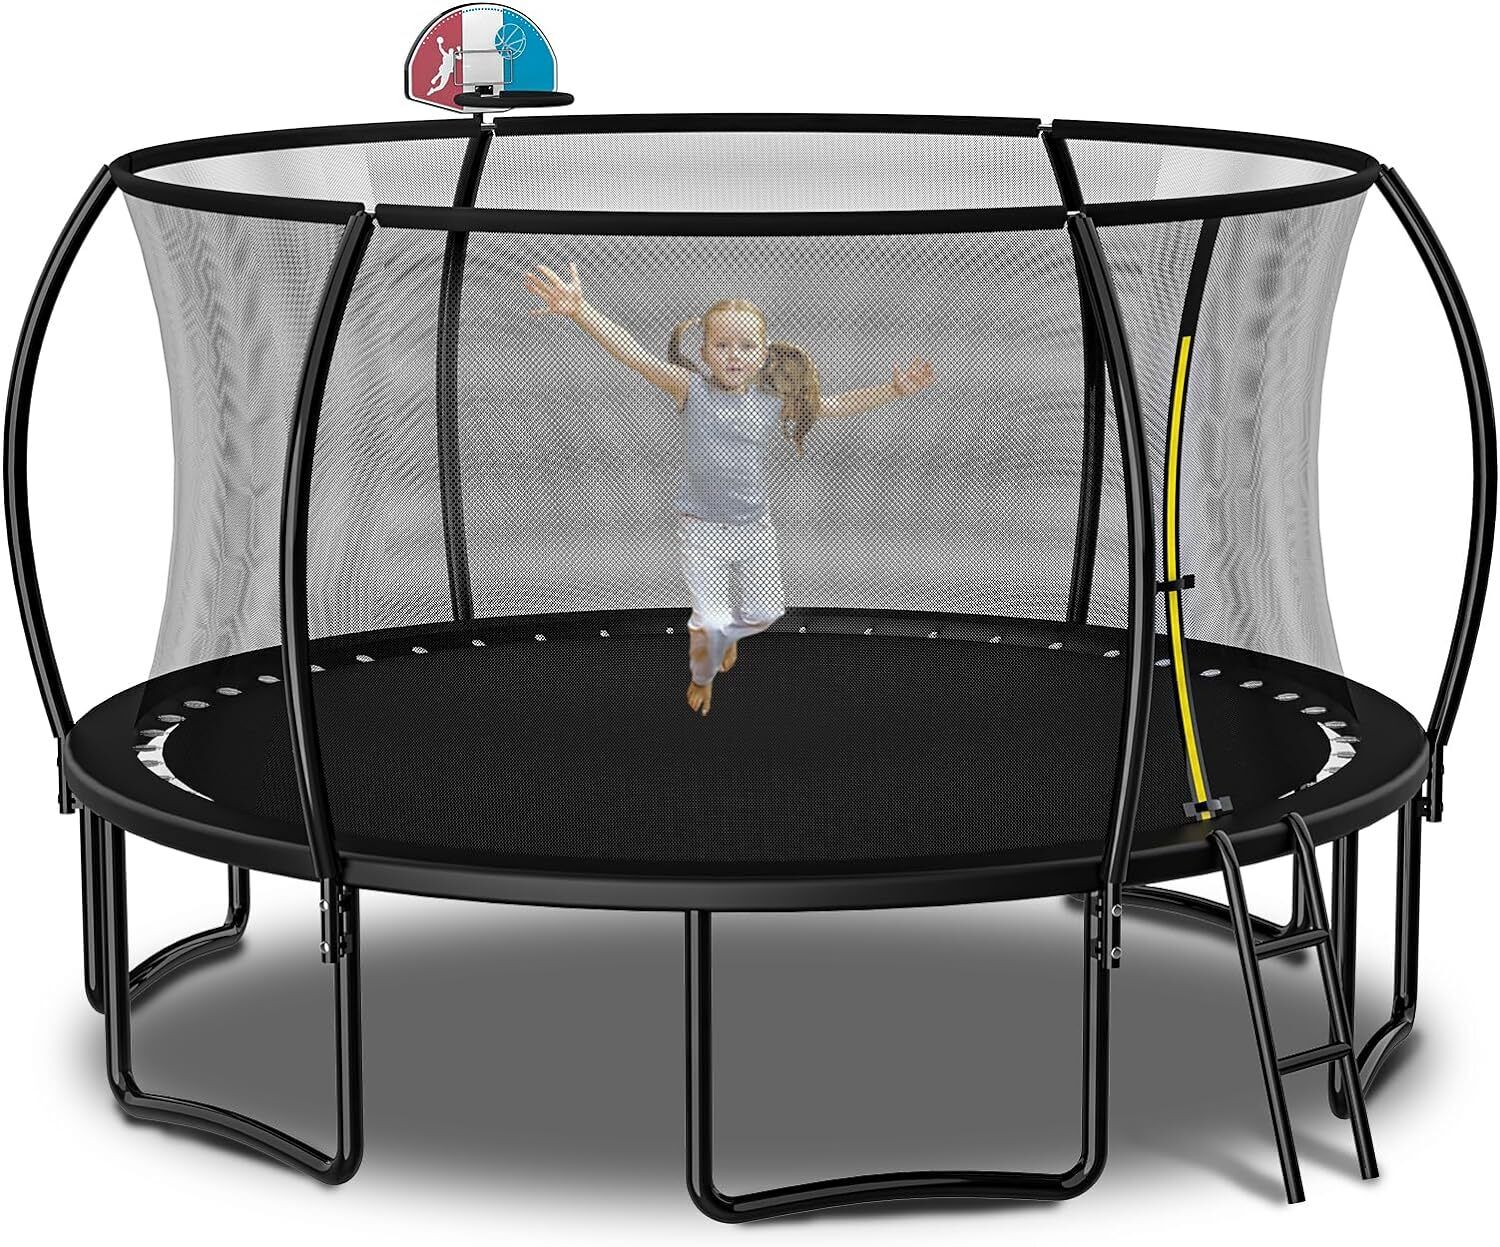 Trampoline Set with Swing, Slide, Basketball Hoop,Sports Fitness Trampolines E unbrand Does not apply - фотография #6